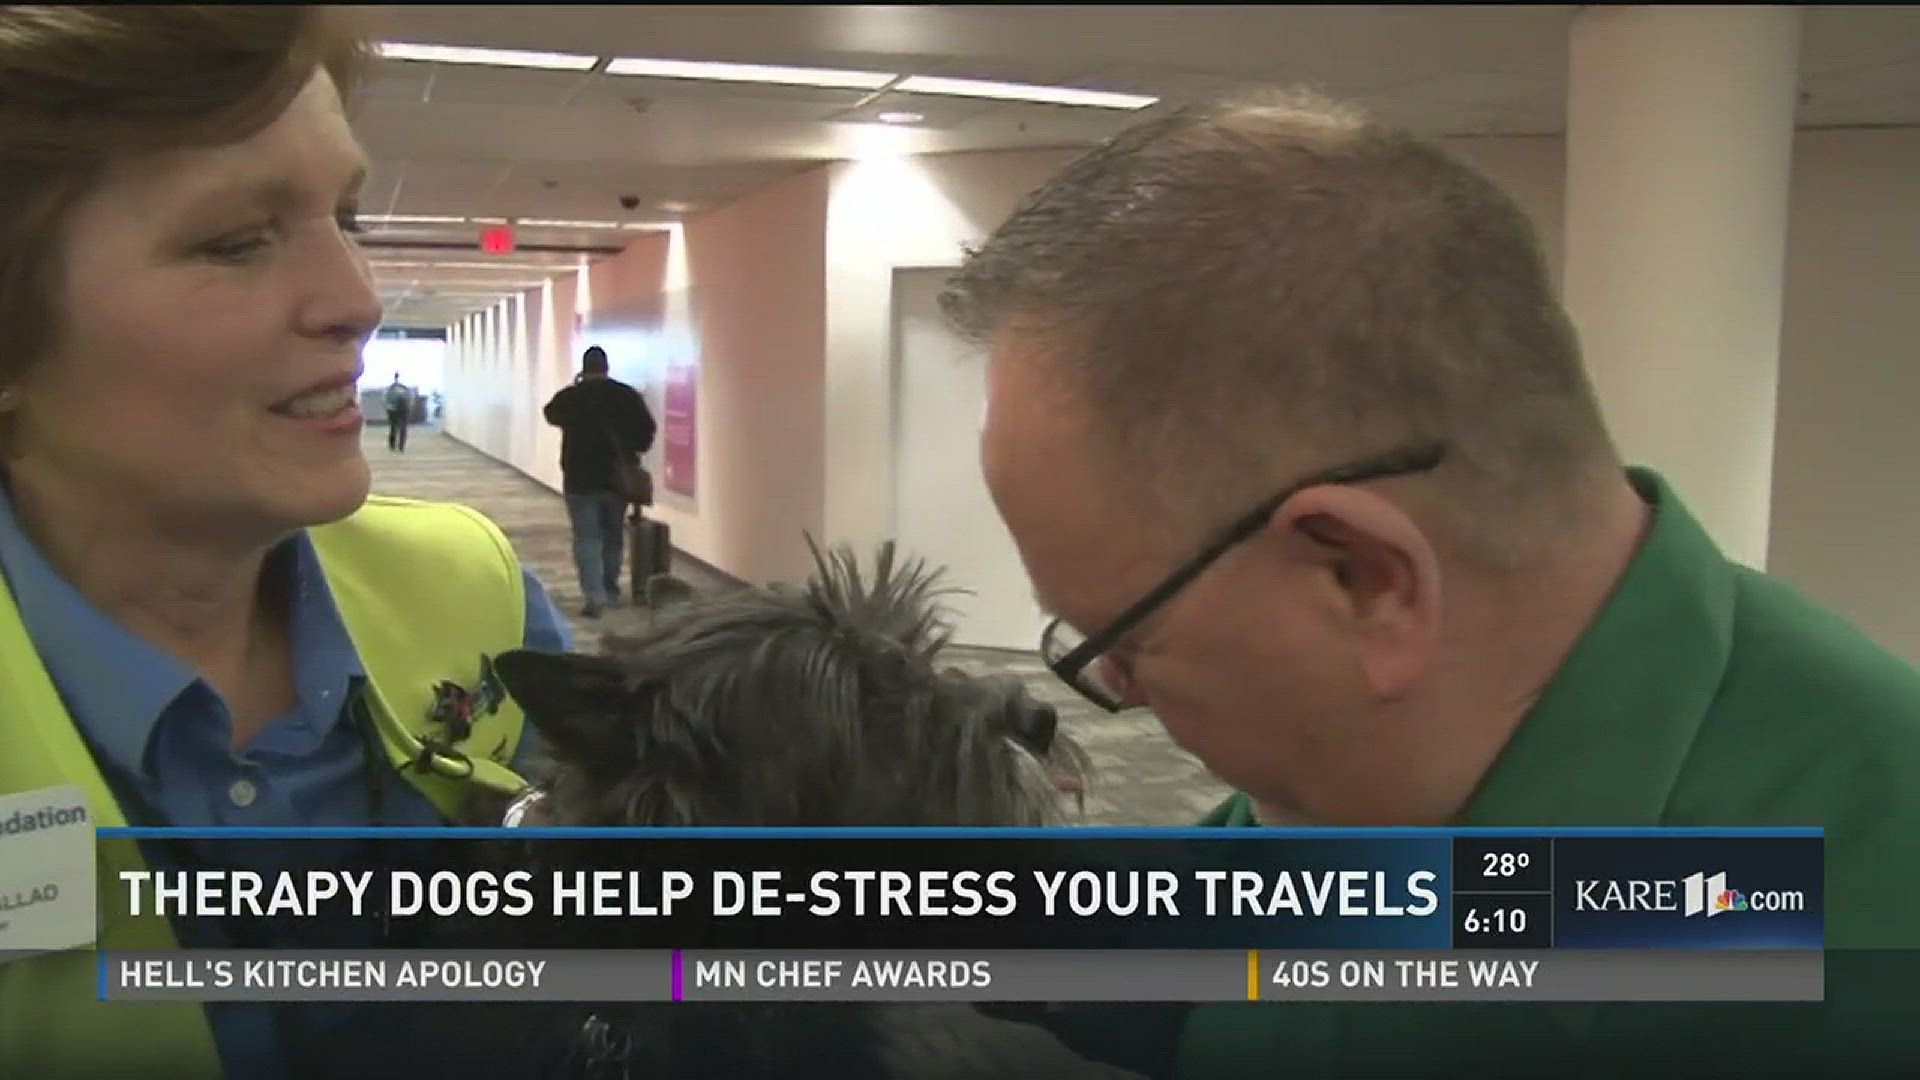 Therapy dogs help de-stress travelers